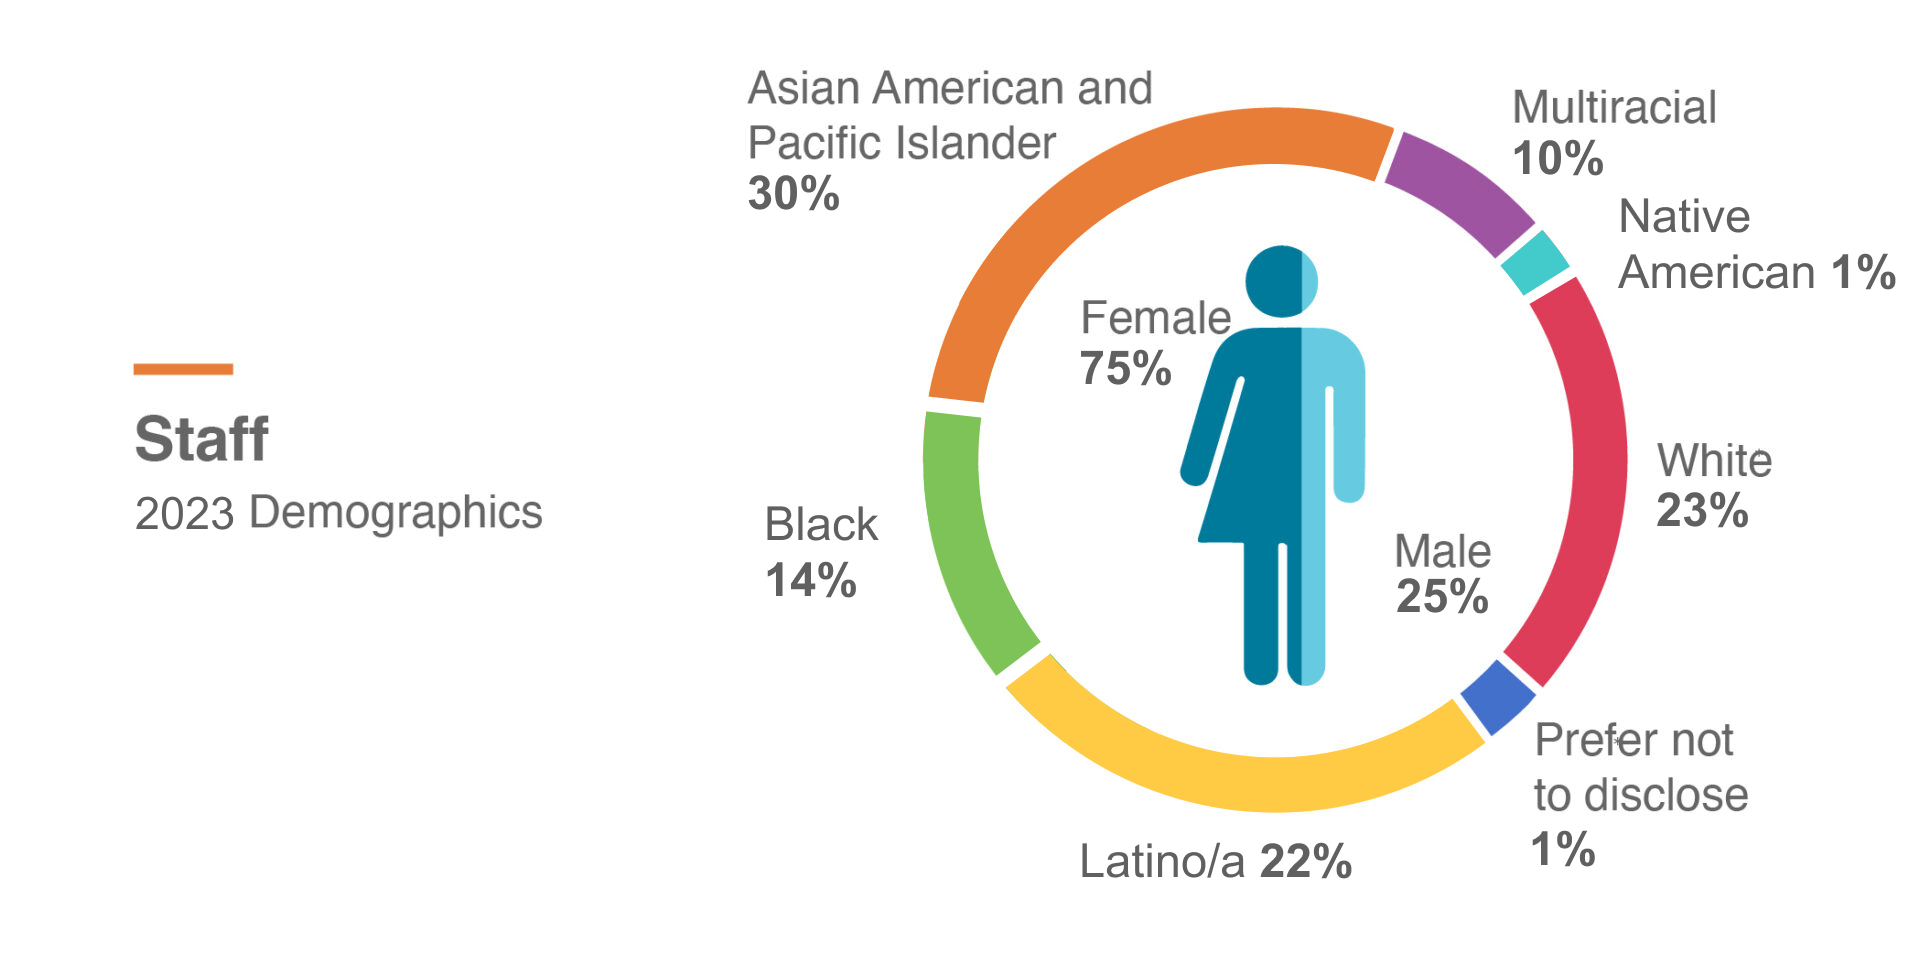 Staff 2023 Demographics Asian American and Pacific Islander - 30% Multiracial - 10% Native American - 1% White - 23% Prefer not to disclose - 1% Latino/a 22% Black - 14% Female 75% Male 25%